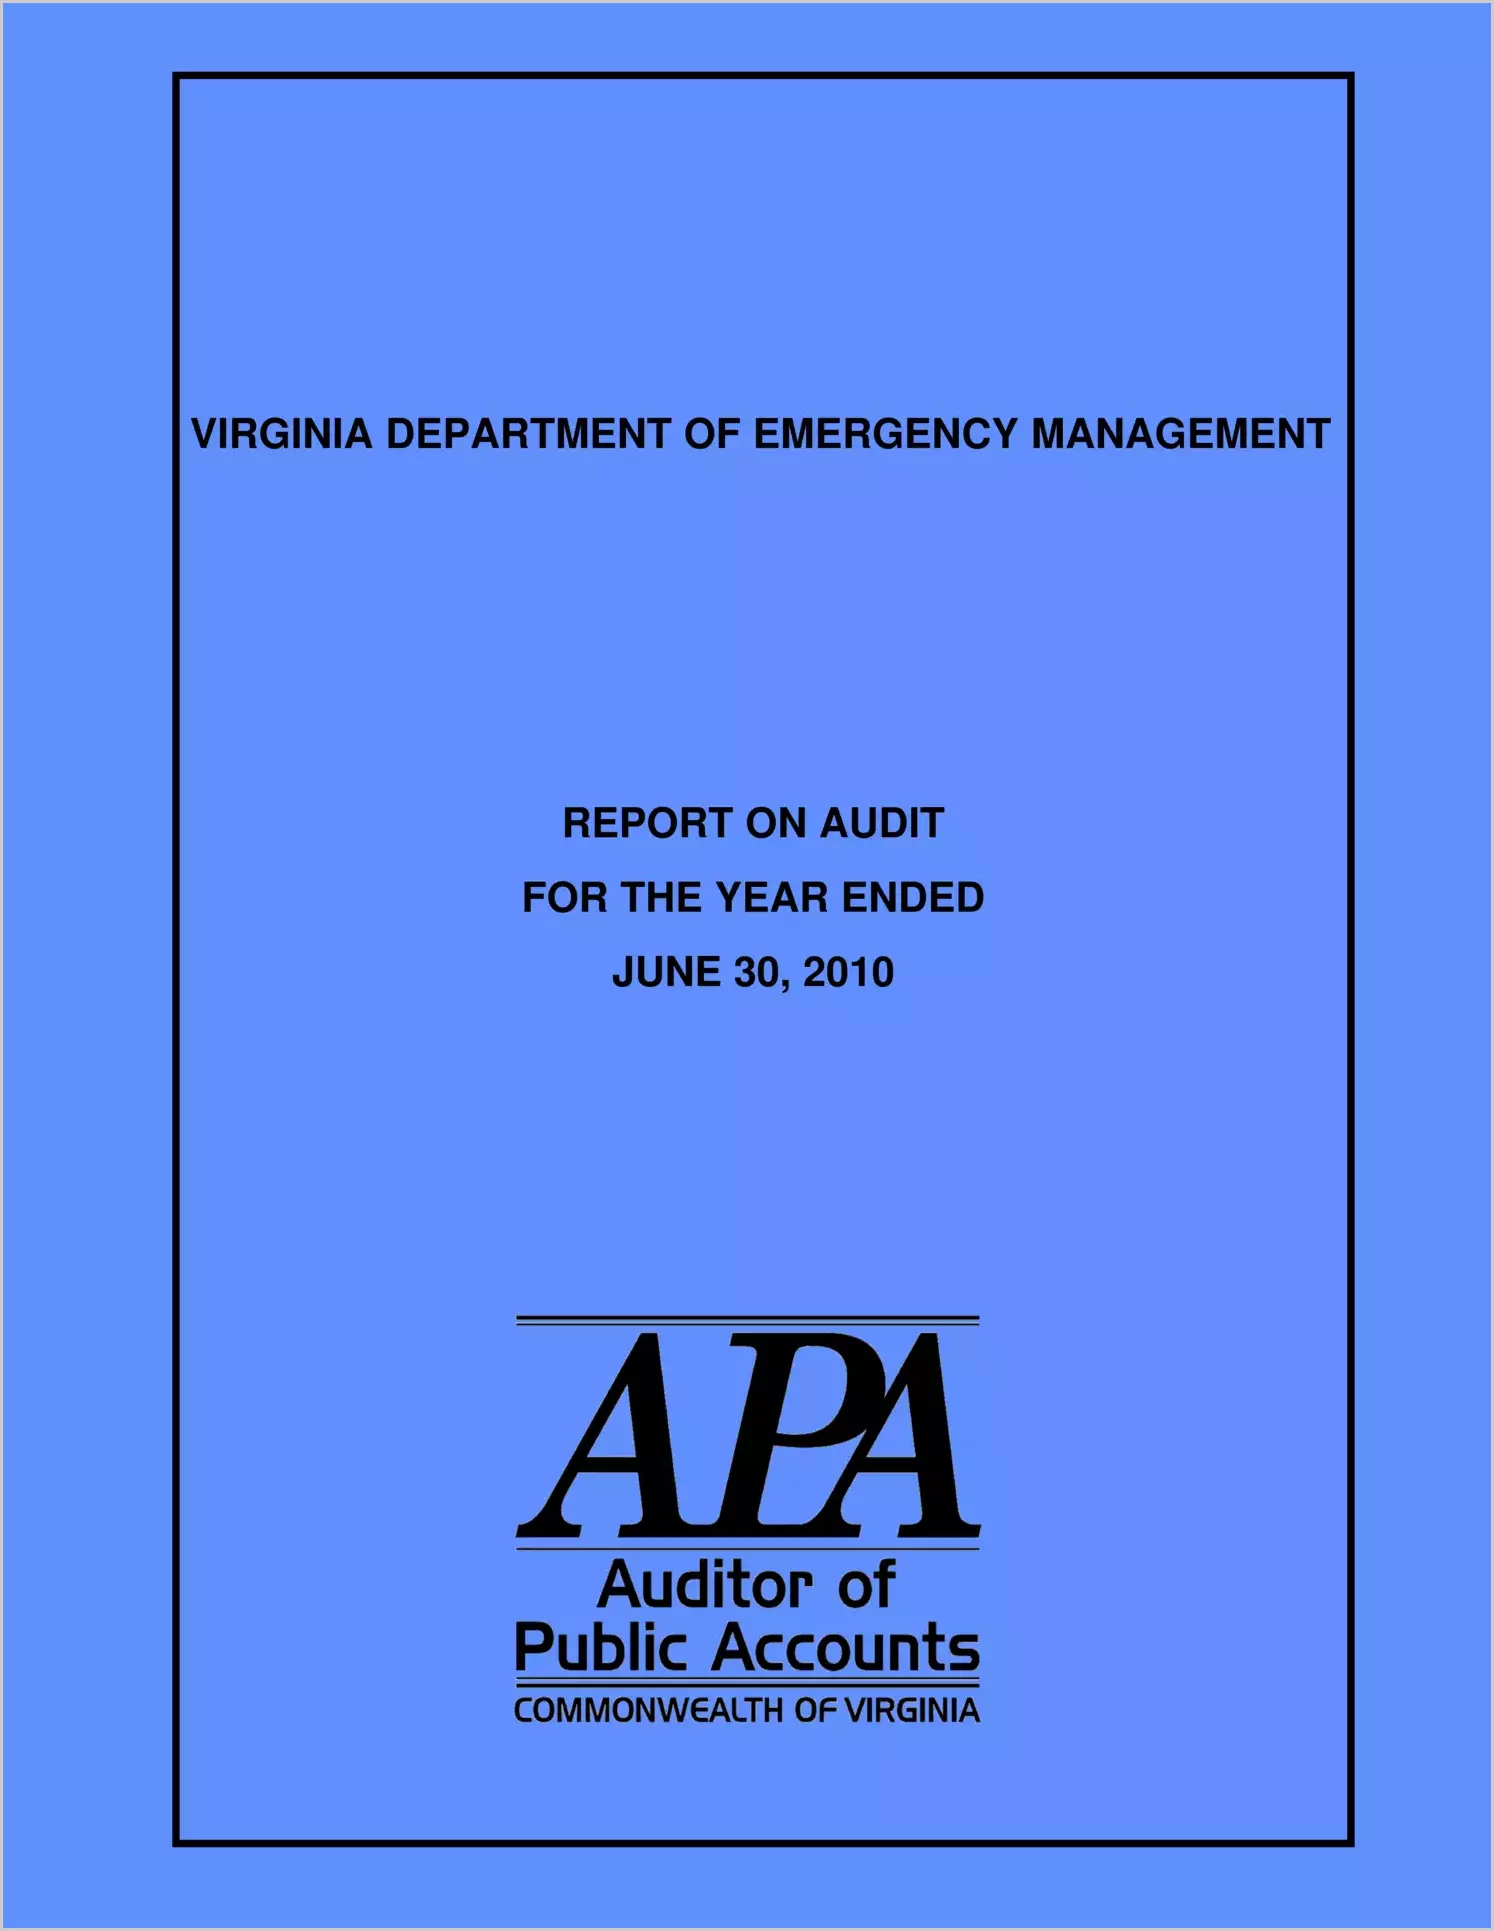 Virginia Department of Emergency Management report on audit for the year ended June 30, 2010